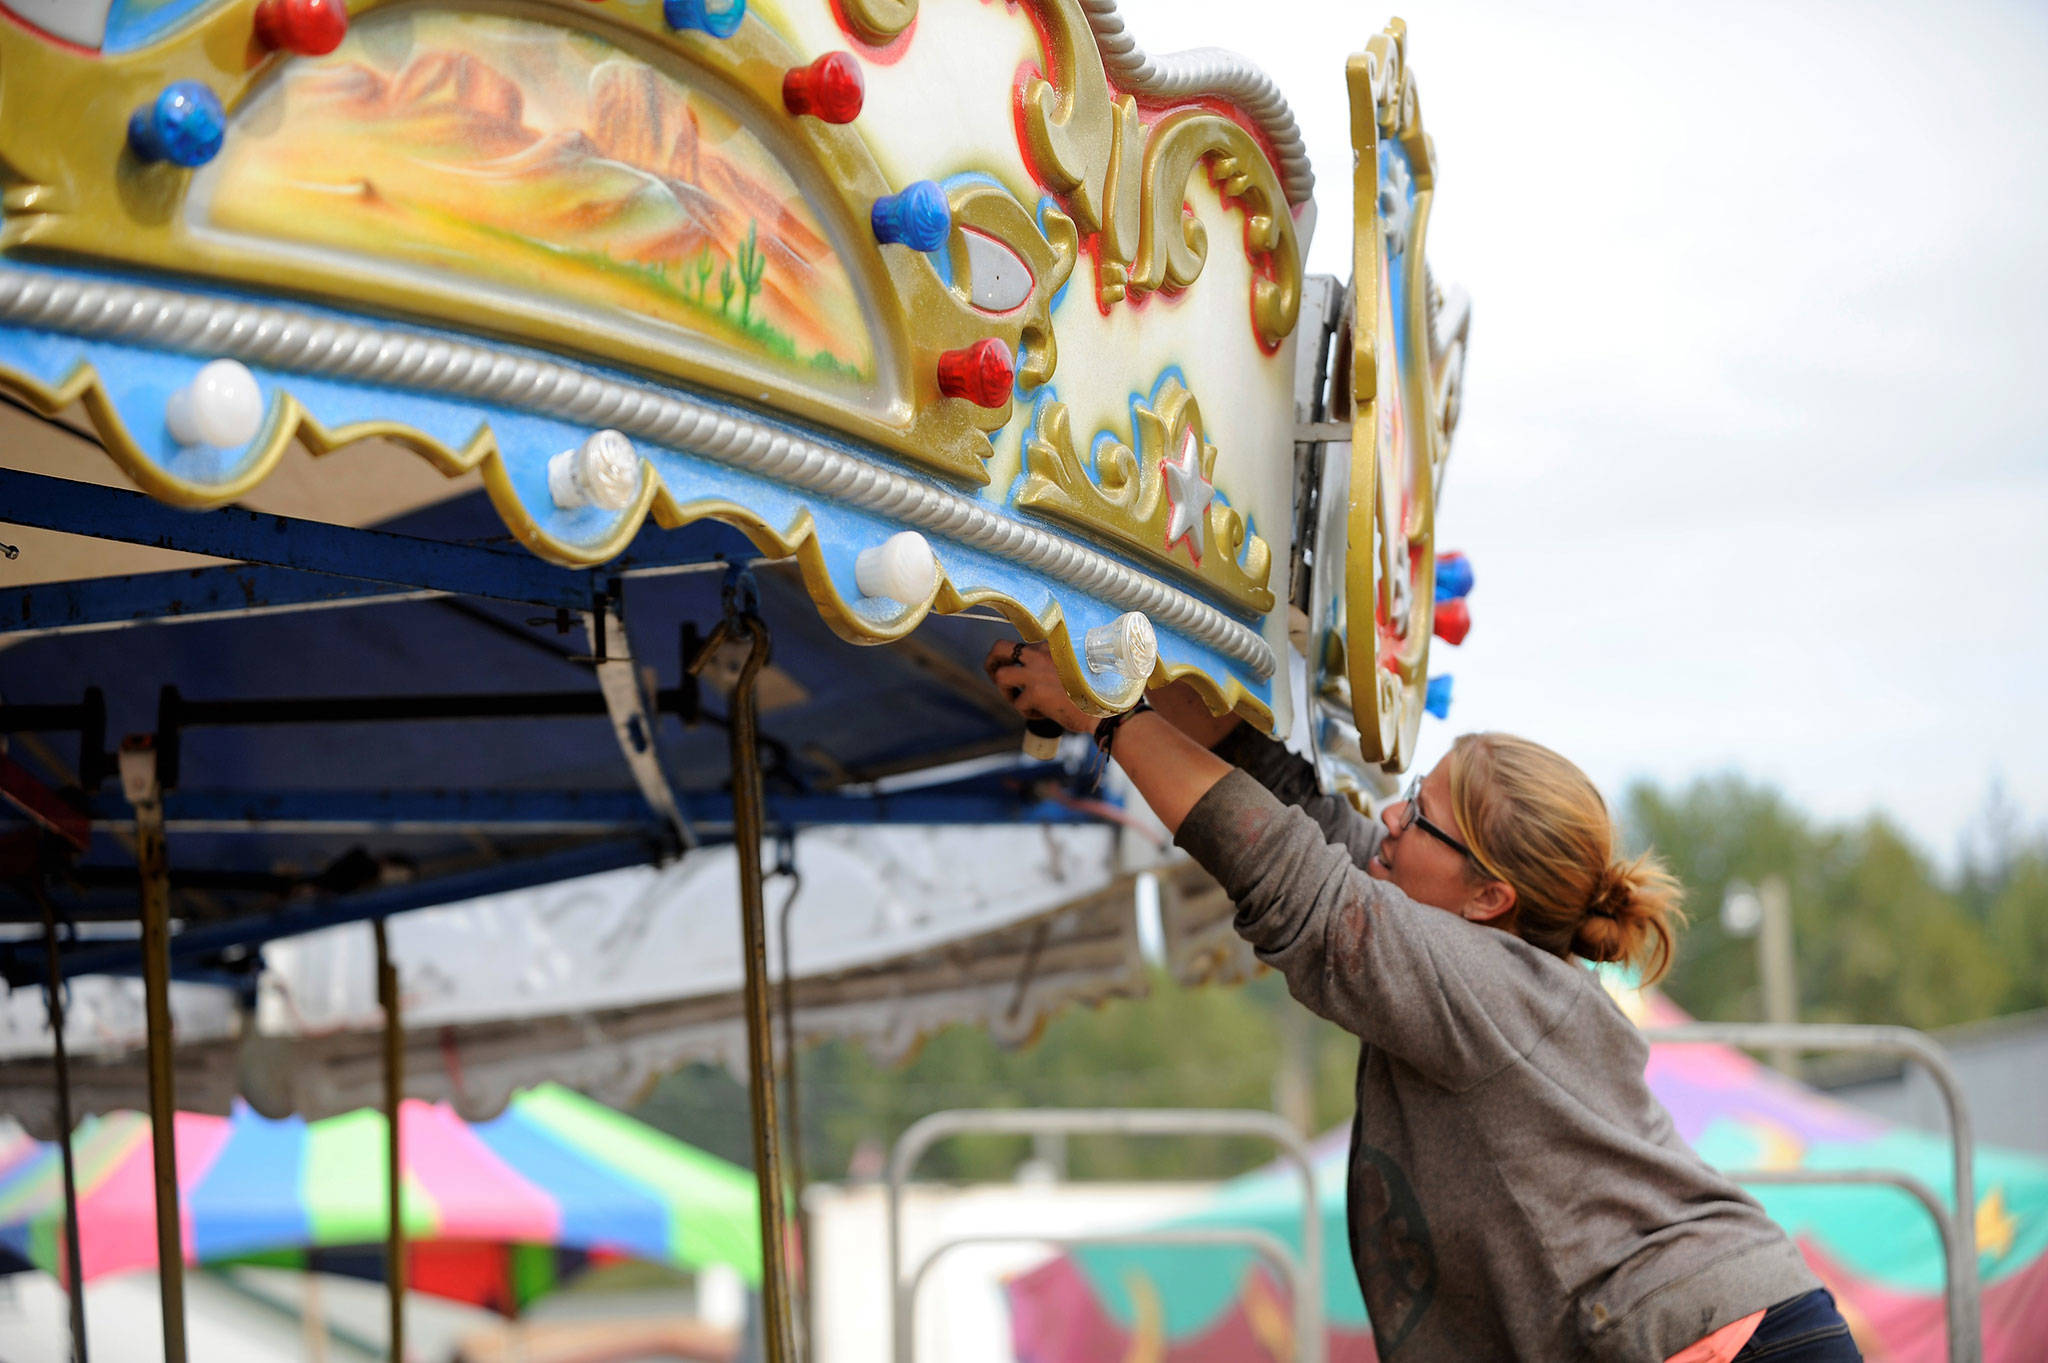 Amber Guy with Rainier Amusement of Portland, Ore., helps set up the merry-go-round at the Clallam County Fair on Aug. 14.